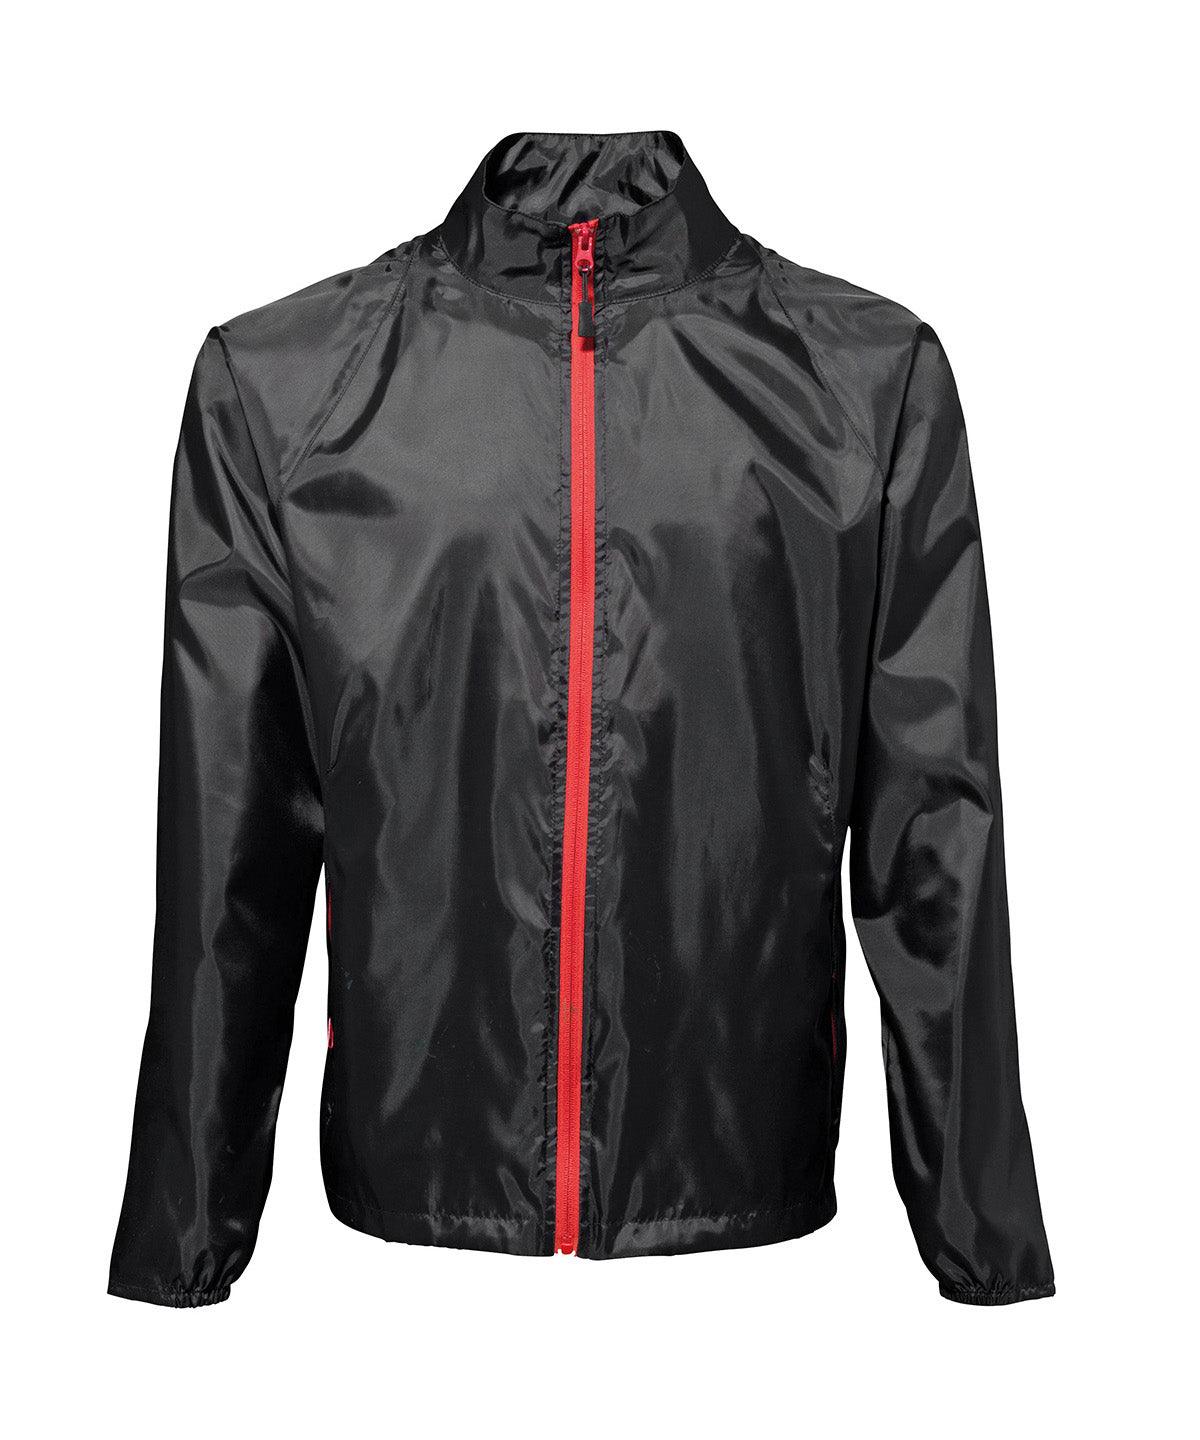 Black/Red - Contrast lightweight jacket Jackets 2786 Alfresco Dining, Camo, Jackets & Coats, Lightweight layers, Rebrandable, S/S 19 Trend Colours Schoolwear Centres